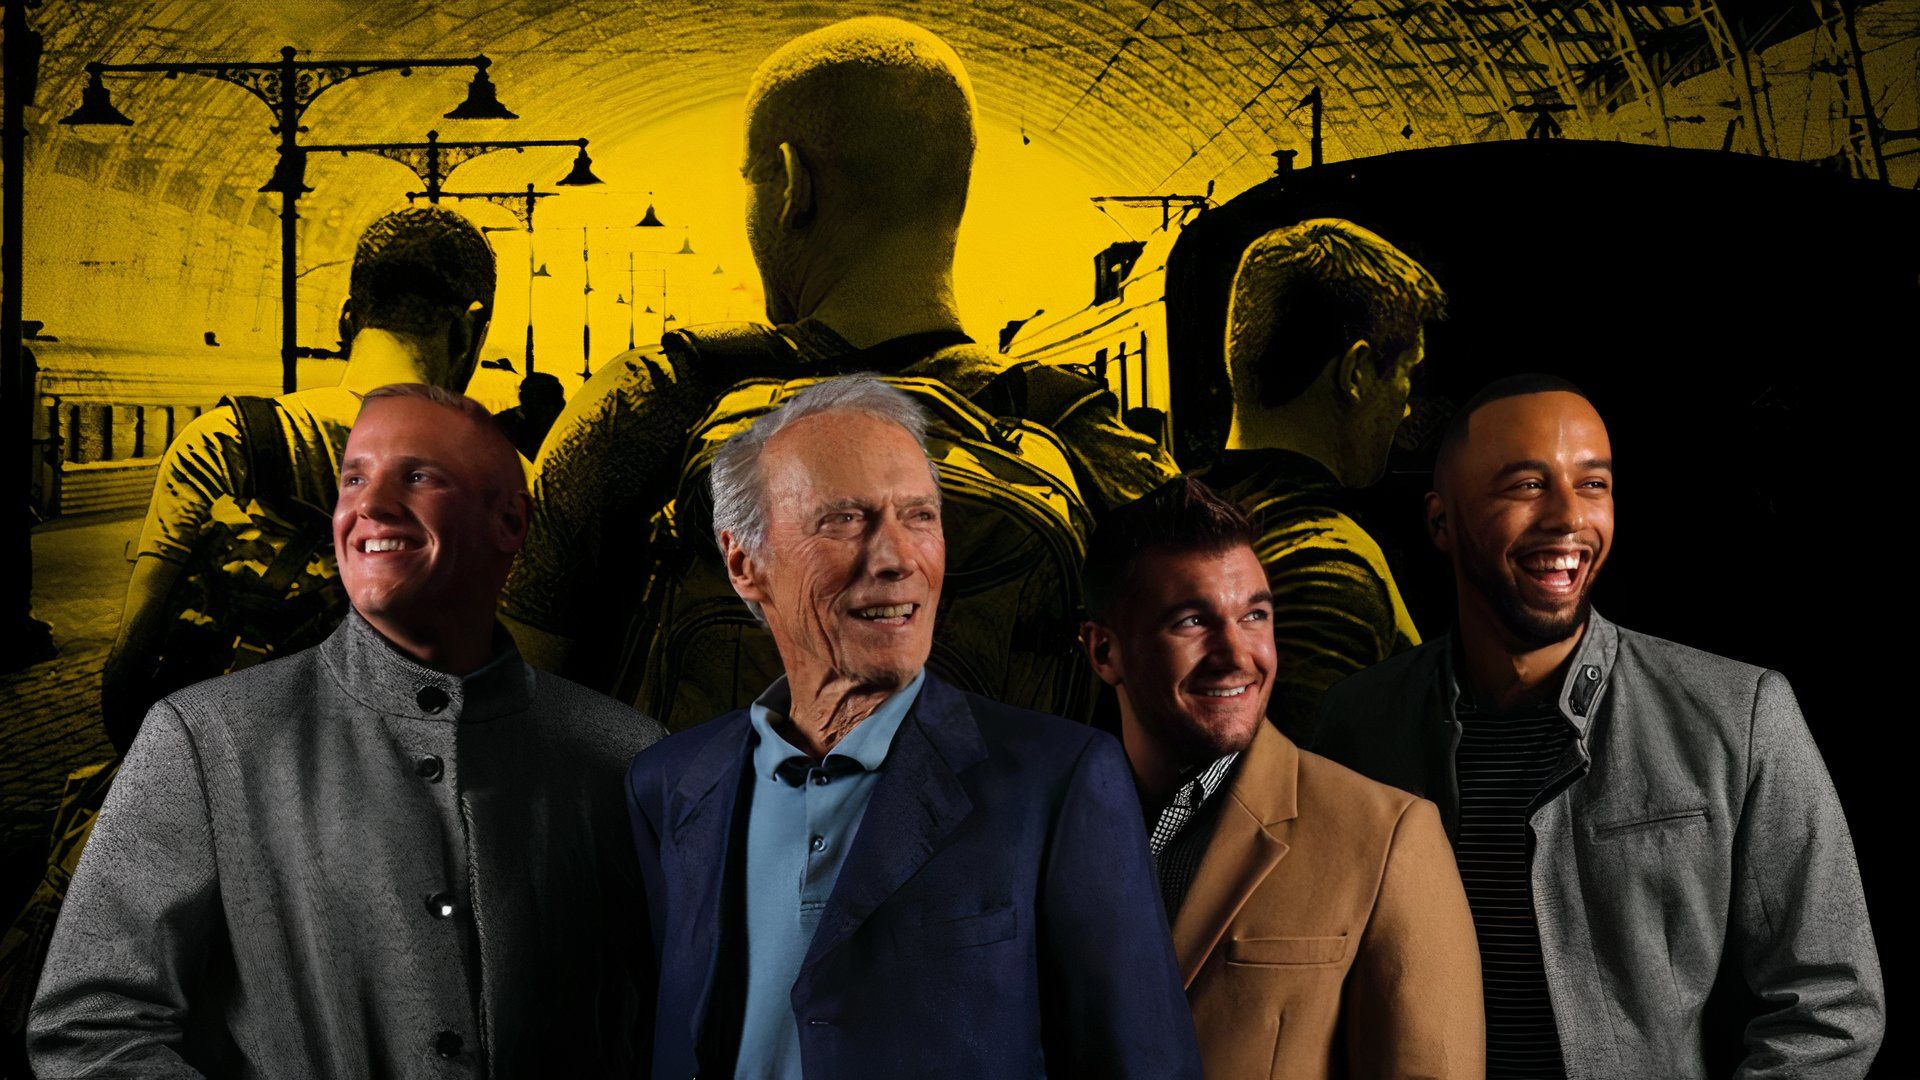 An edited image of Clint Eastwood alongside Spencer Stone, Anthony Sadler, and Alek Skarlatos in the 15:17 to Paris